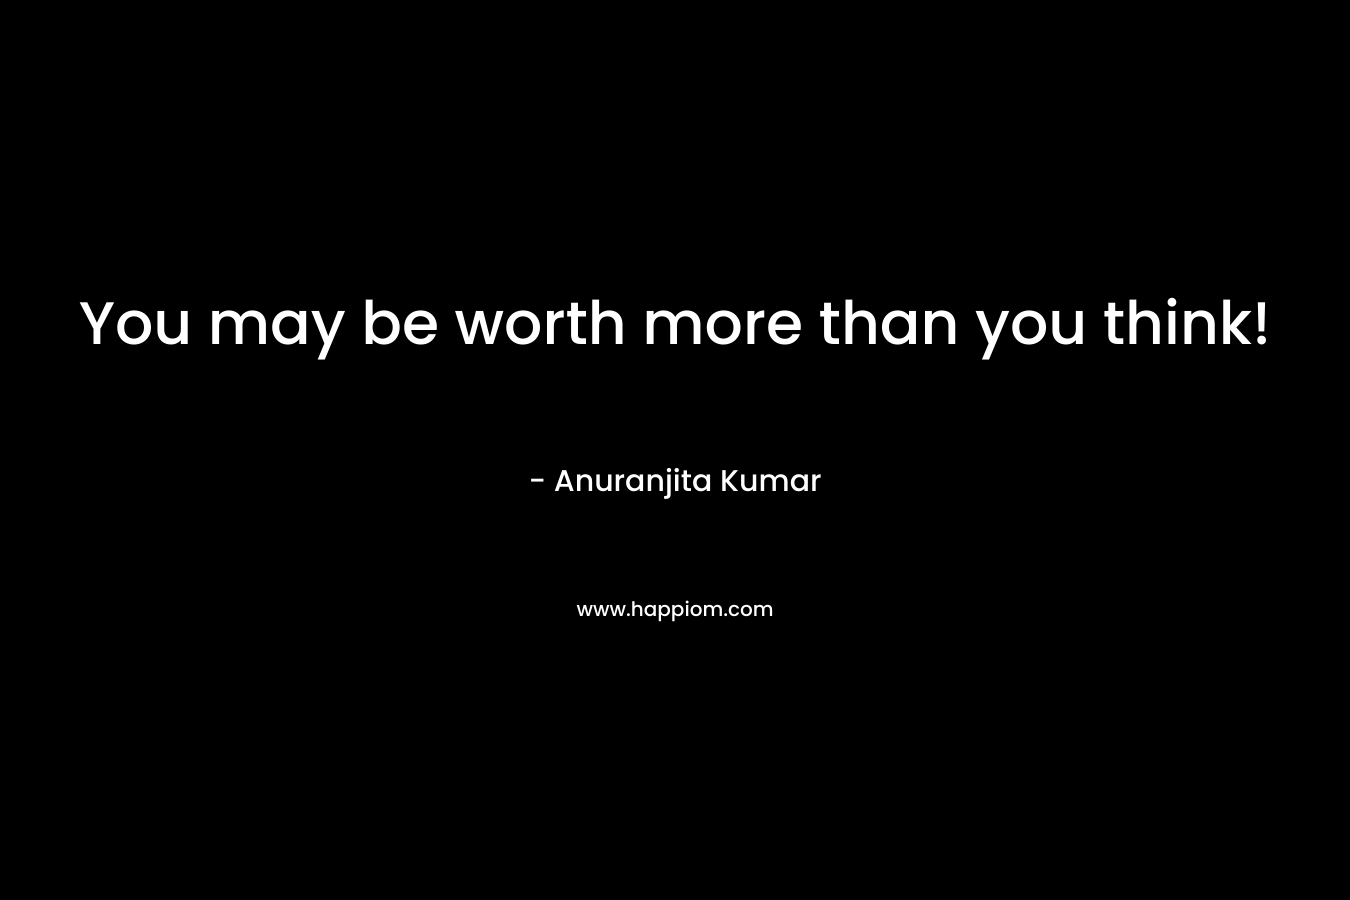 You may be worth more than you think!